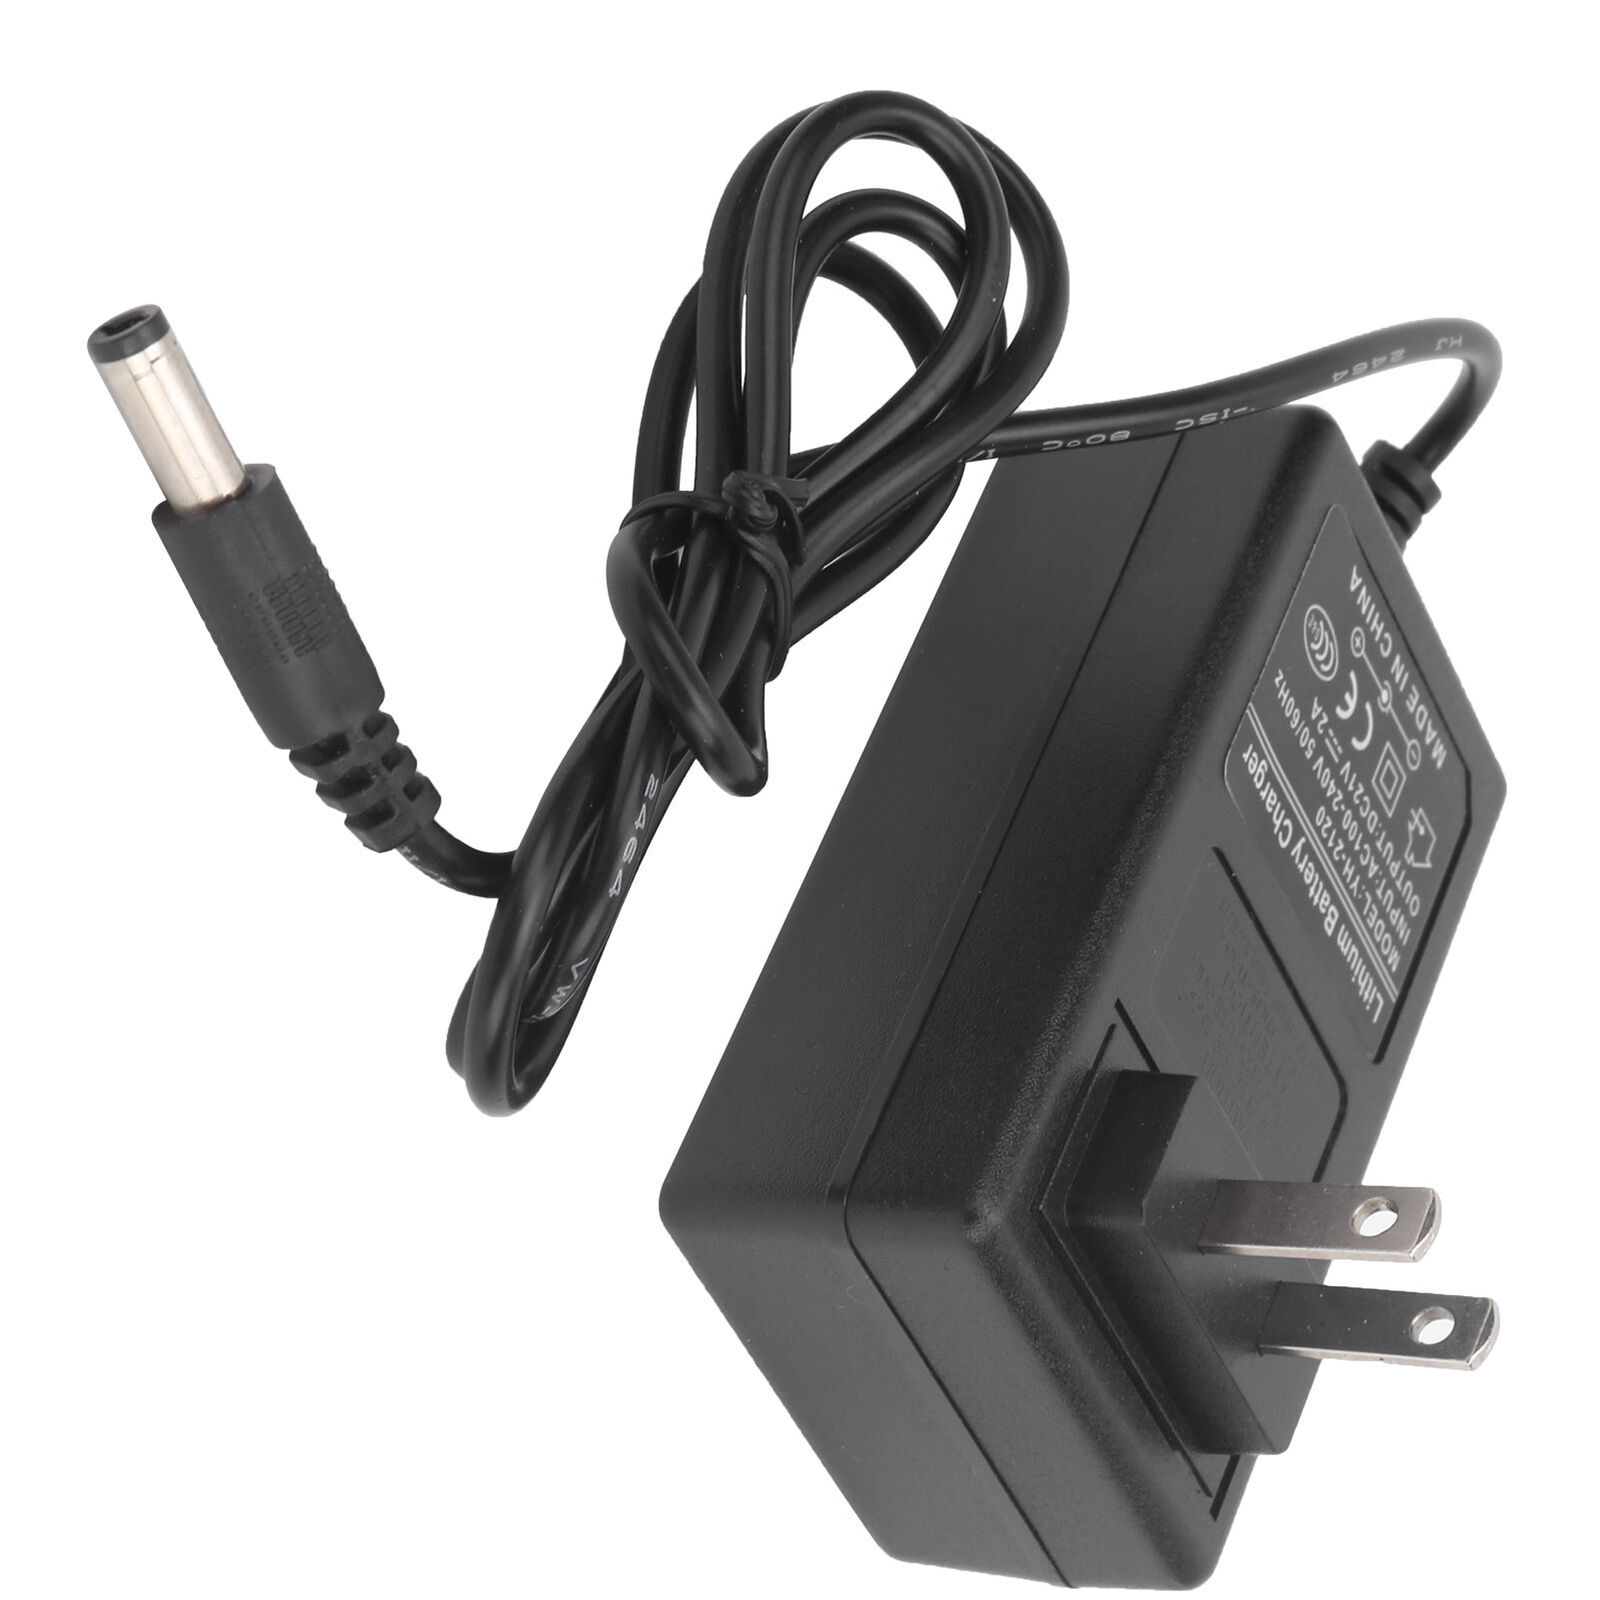 Genuine Konnoc K130-070350P AC DC Adapter Power Supply 7V 3.5A 25W OEM w/P.Cord Connection Split/Duplication 1:1 Color - Click Image to Close